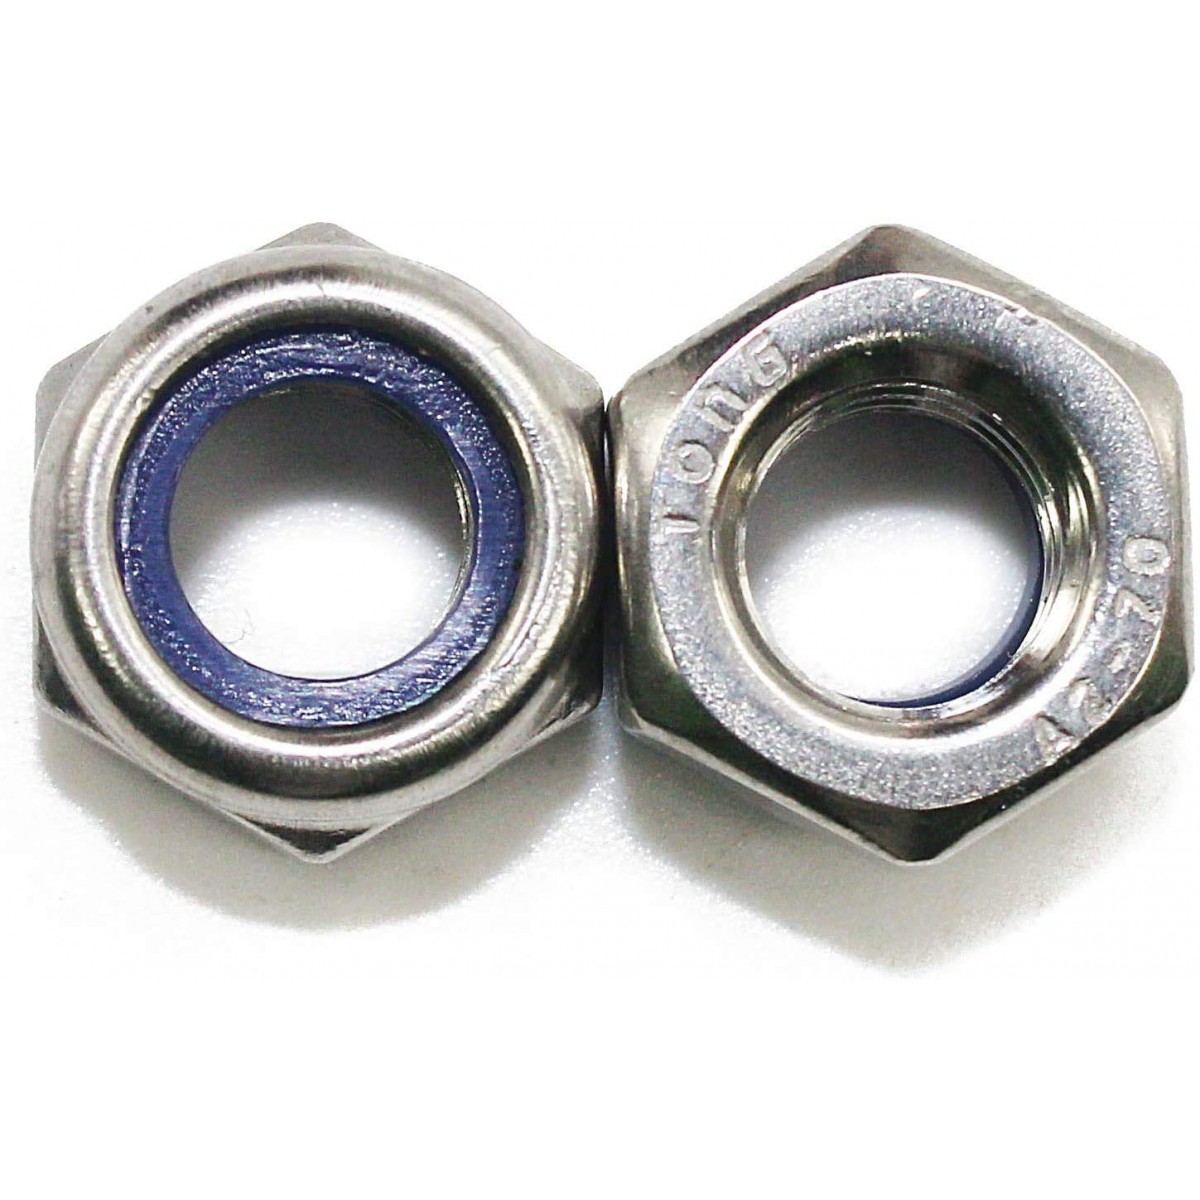 4mm Stainless Steel Hex Full Nuts x50 M4 Stainless Steel Full Nuts 